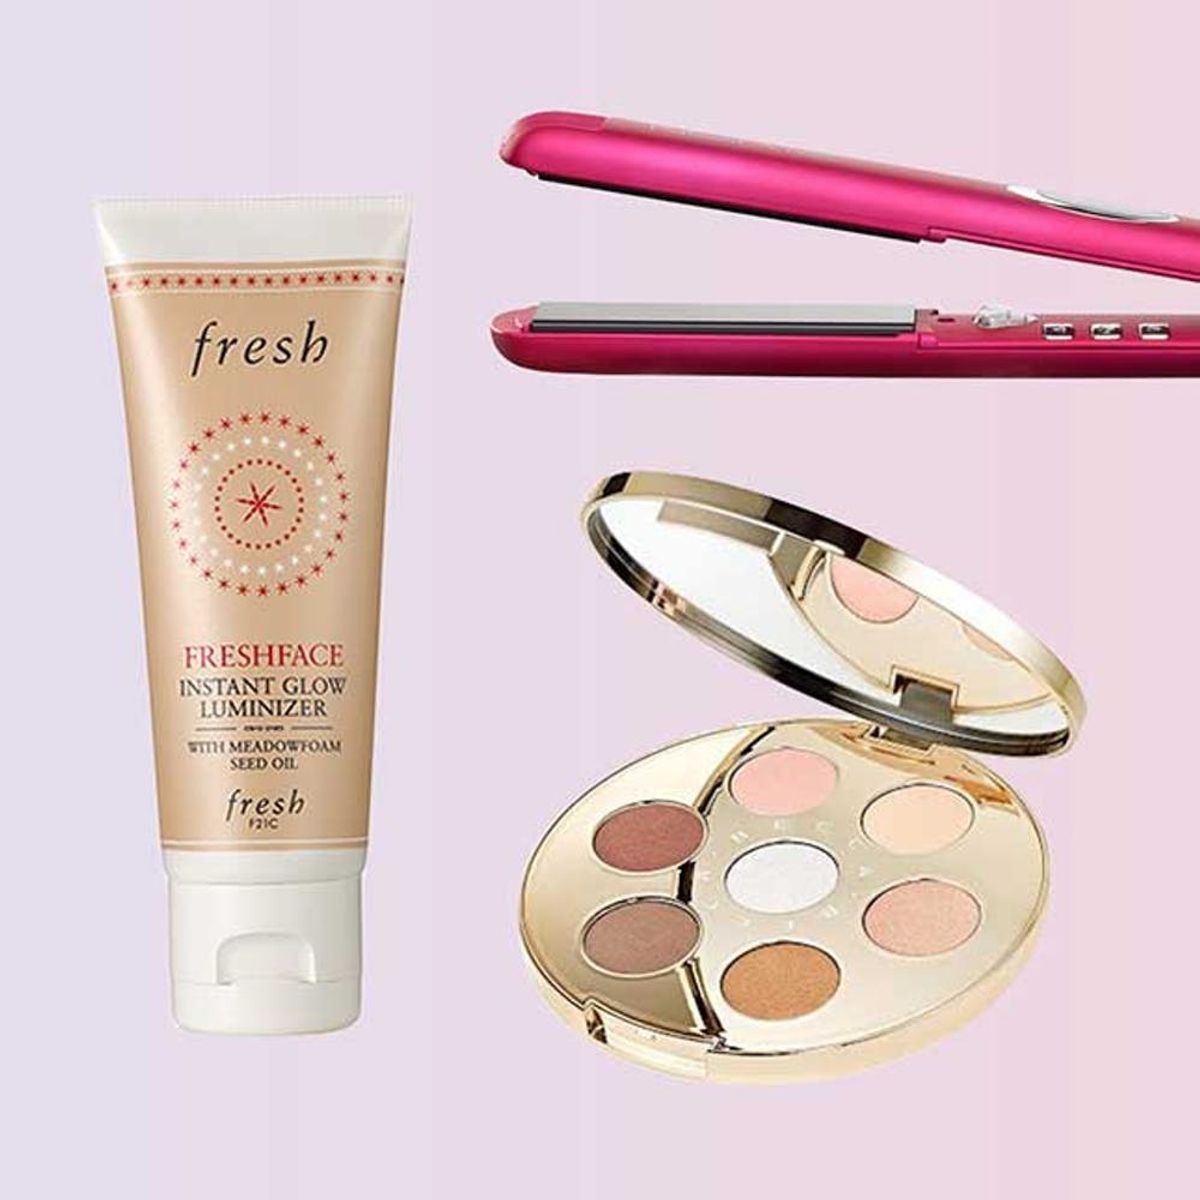 16 New Beauty Products to Buy in October